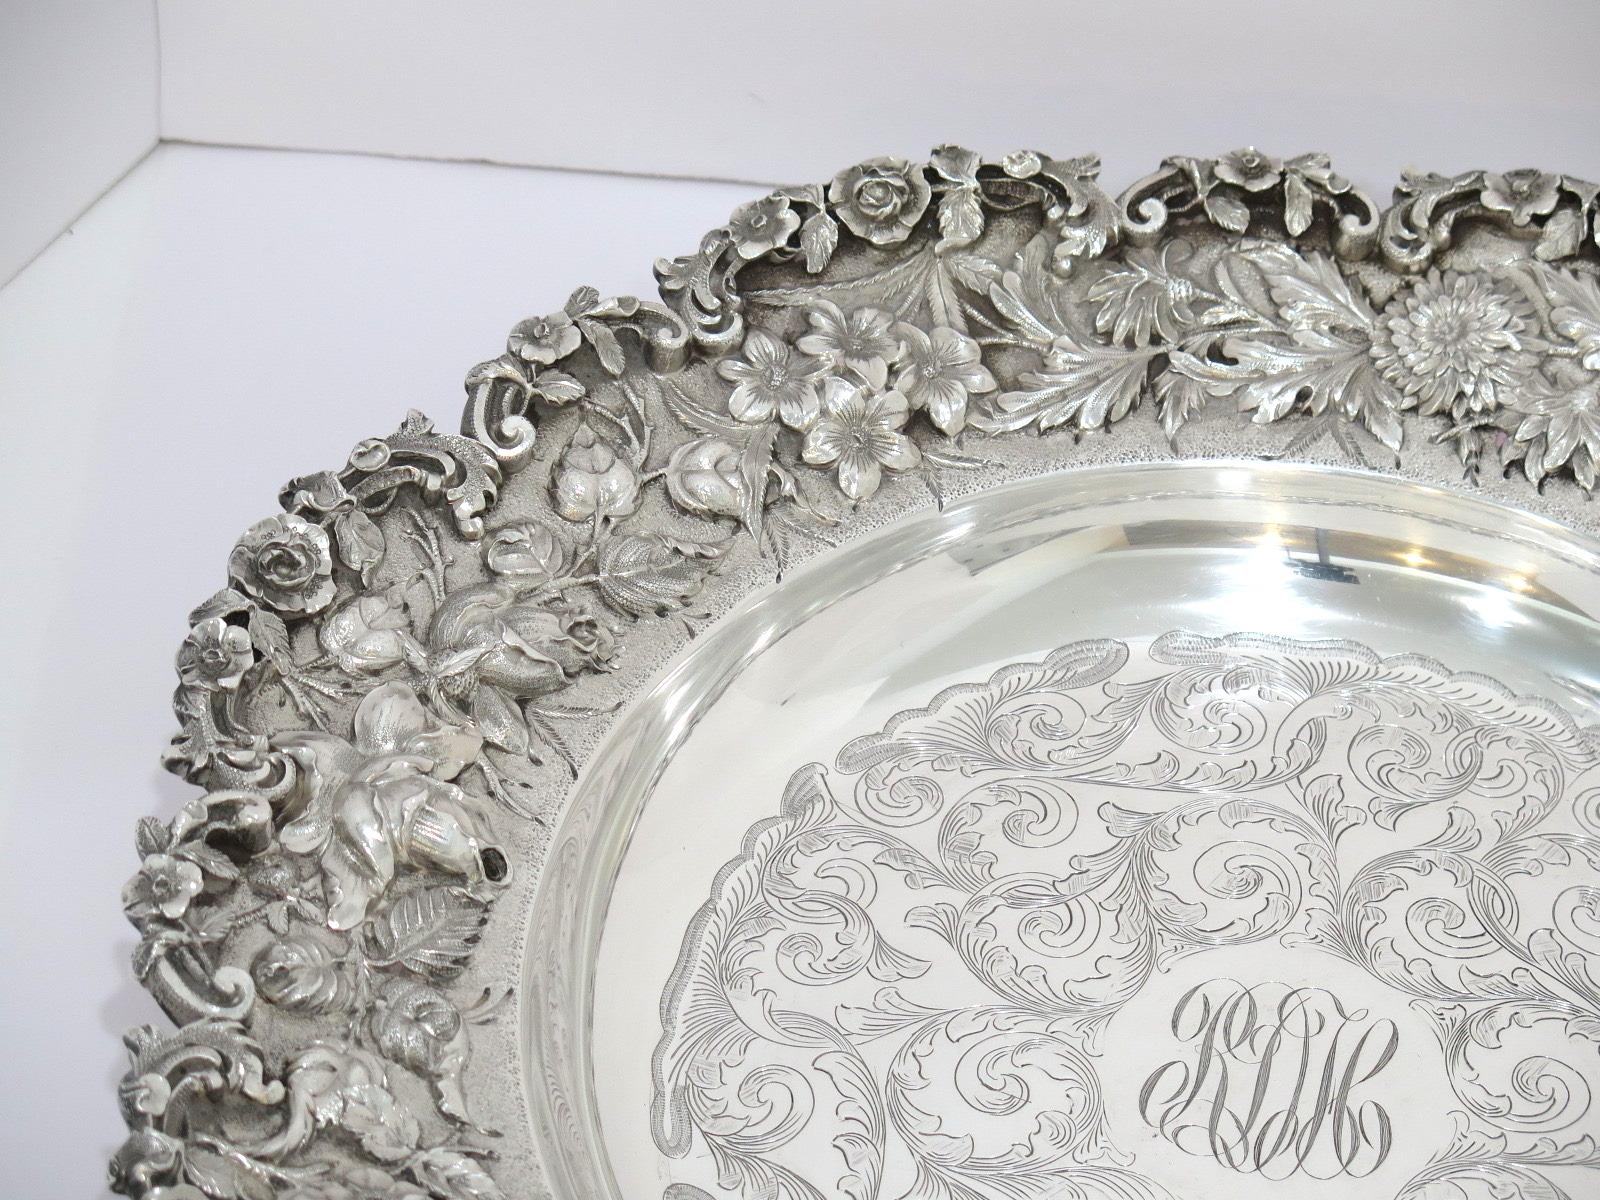 Weight: 55 toz. Measure: 15 in.

This is a museum-level sterling silver repousse large serving plate that was made by Samuel Kirk & Son.